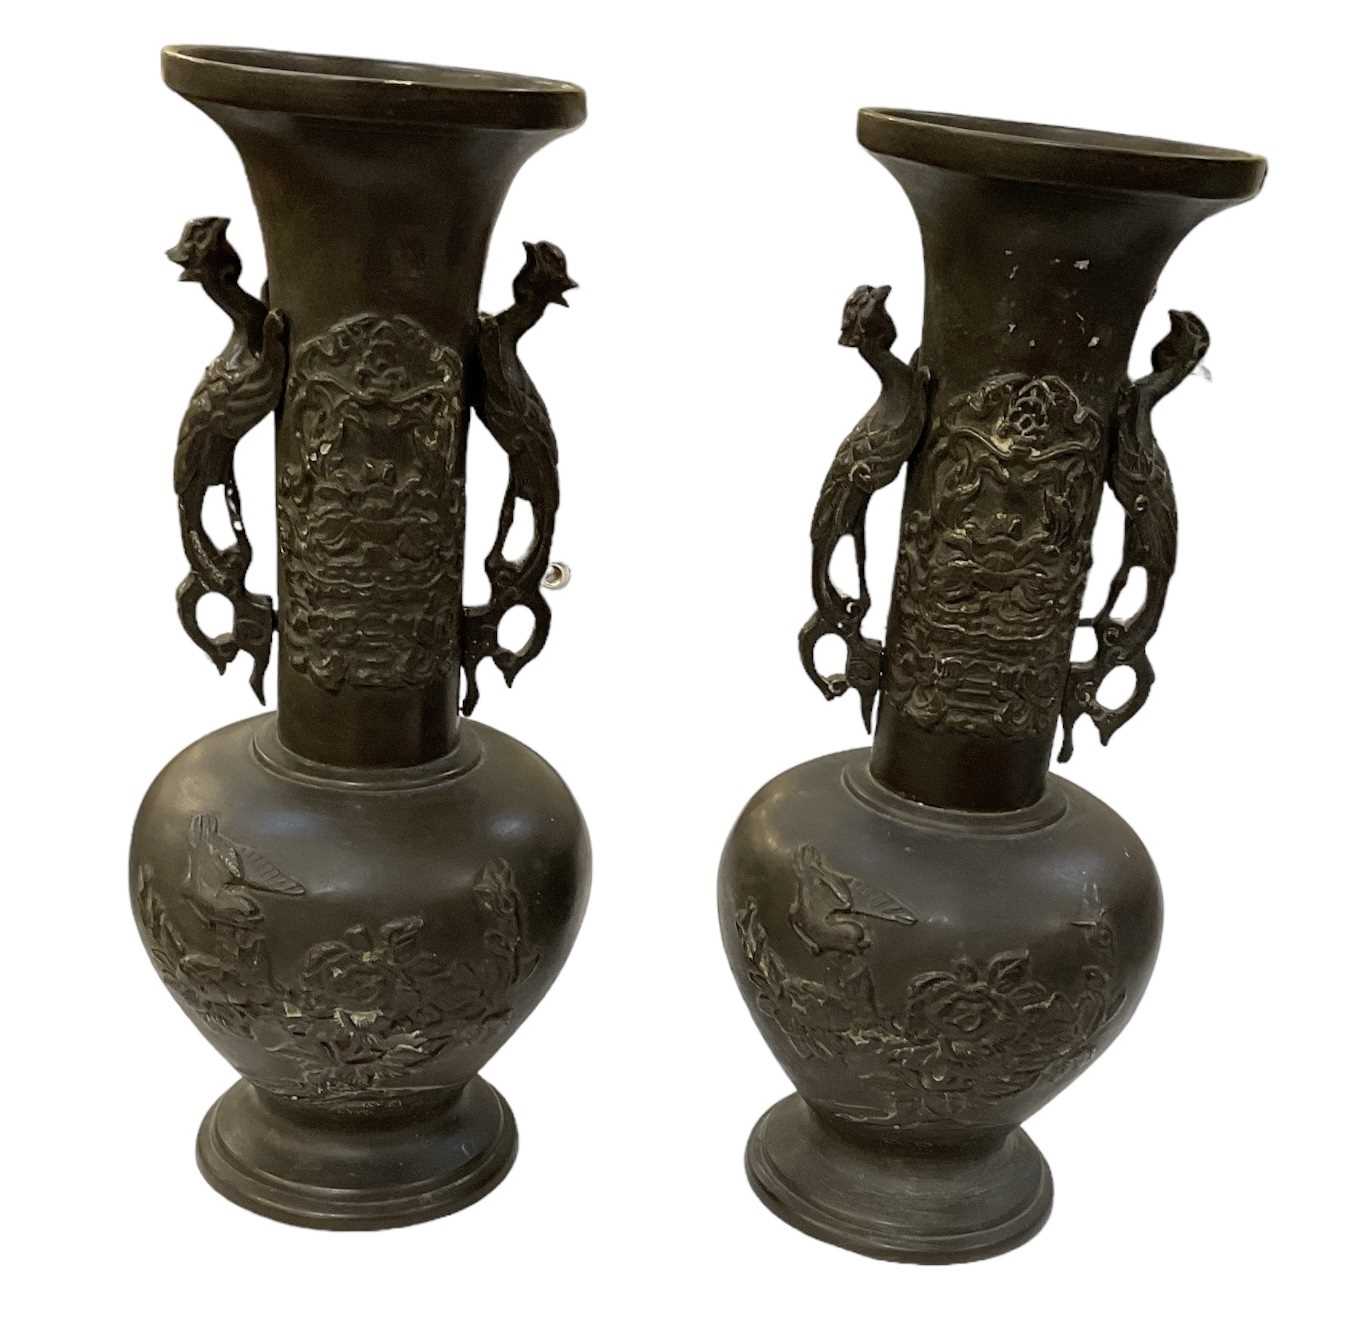 A pair of Japanese bronze Meiji period twin handled vases, the handles modelled as birds and with